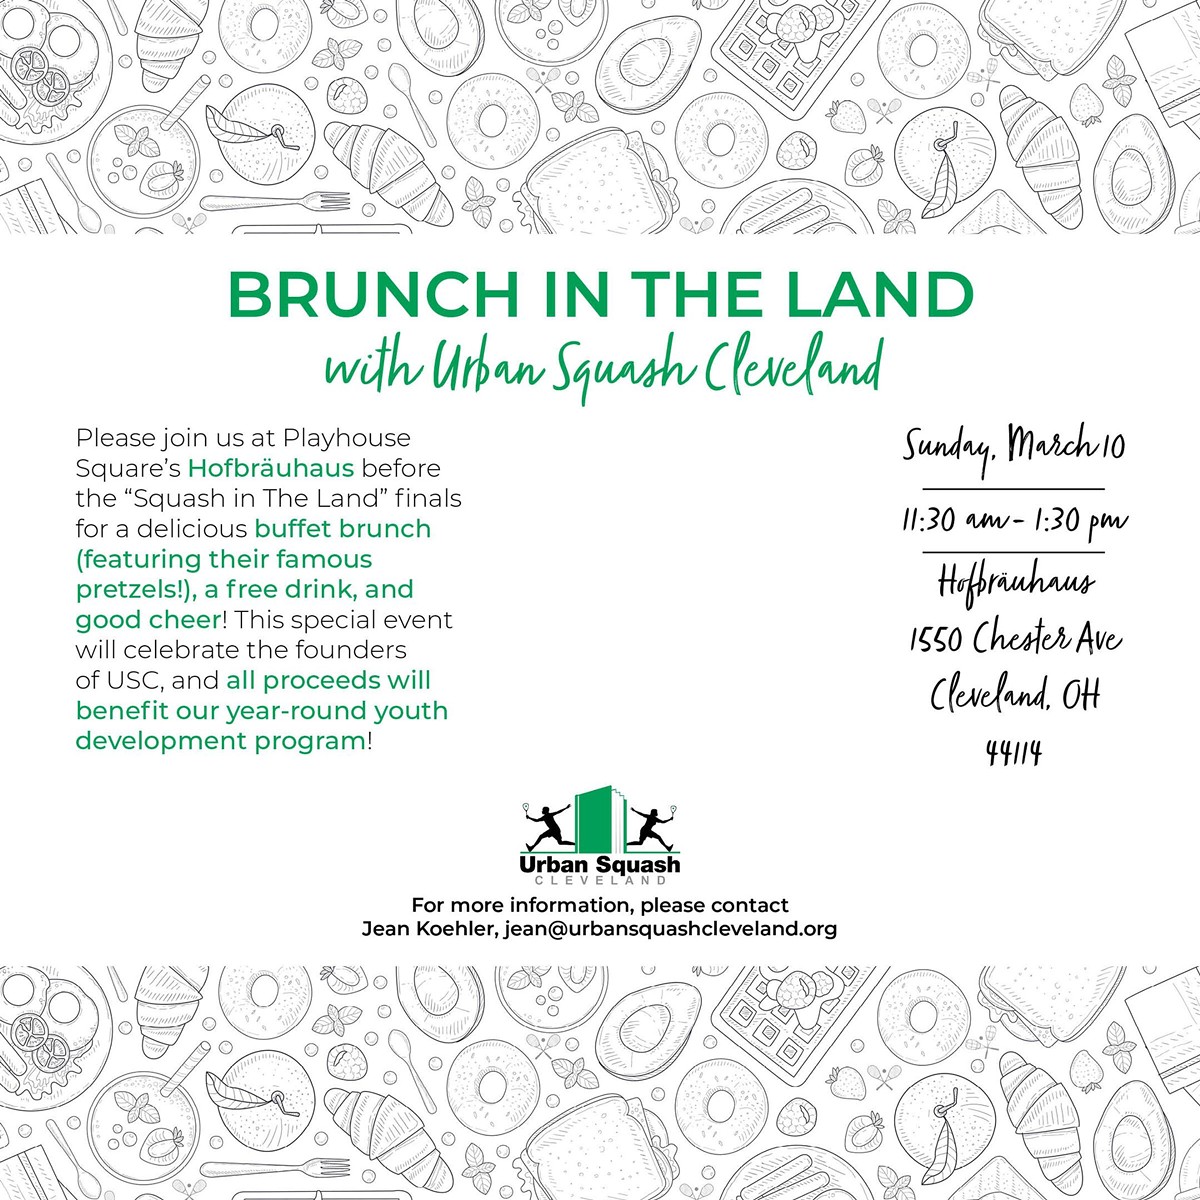 Join USC for Brunch in the Land!